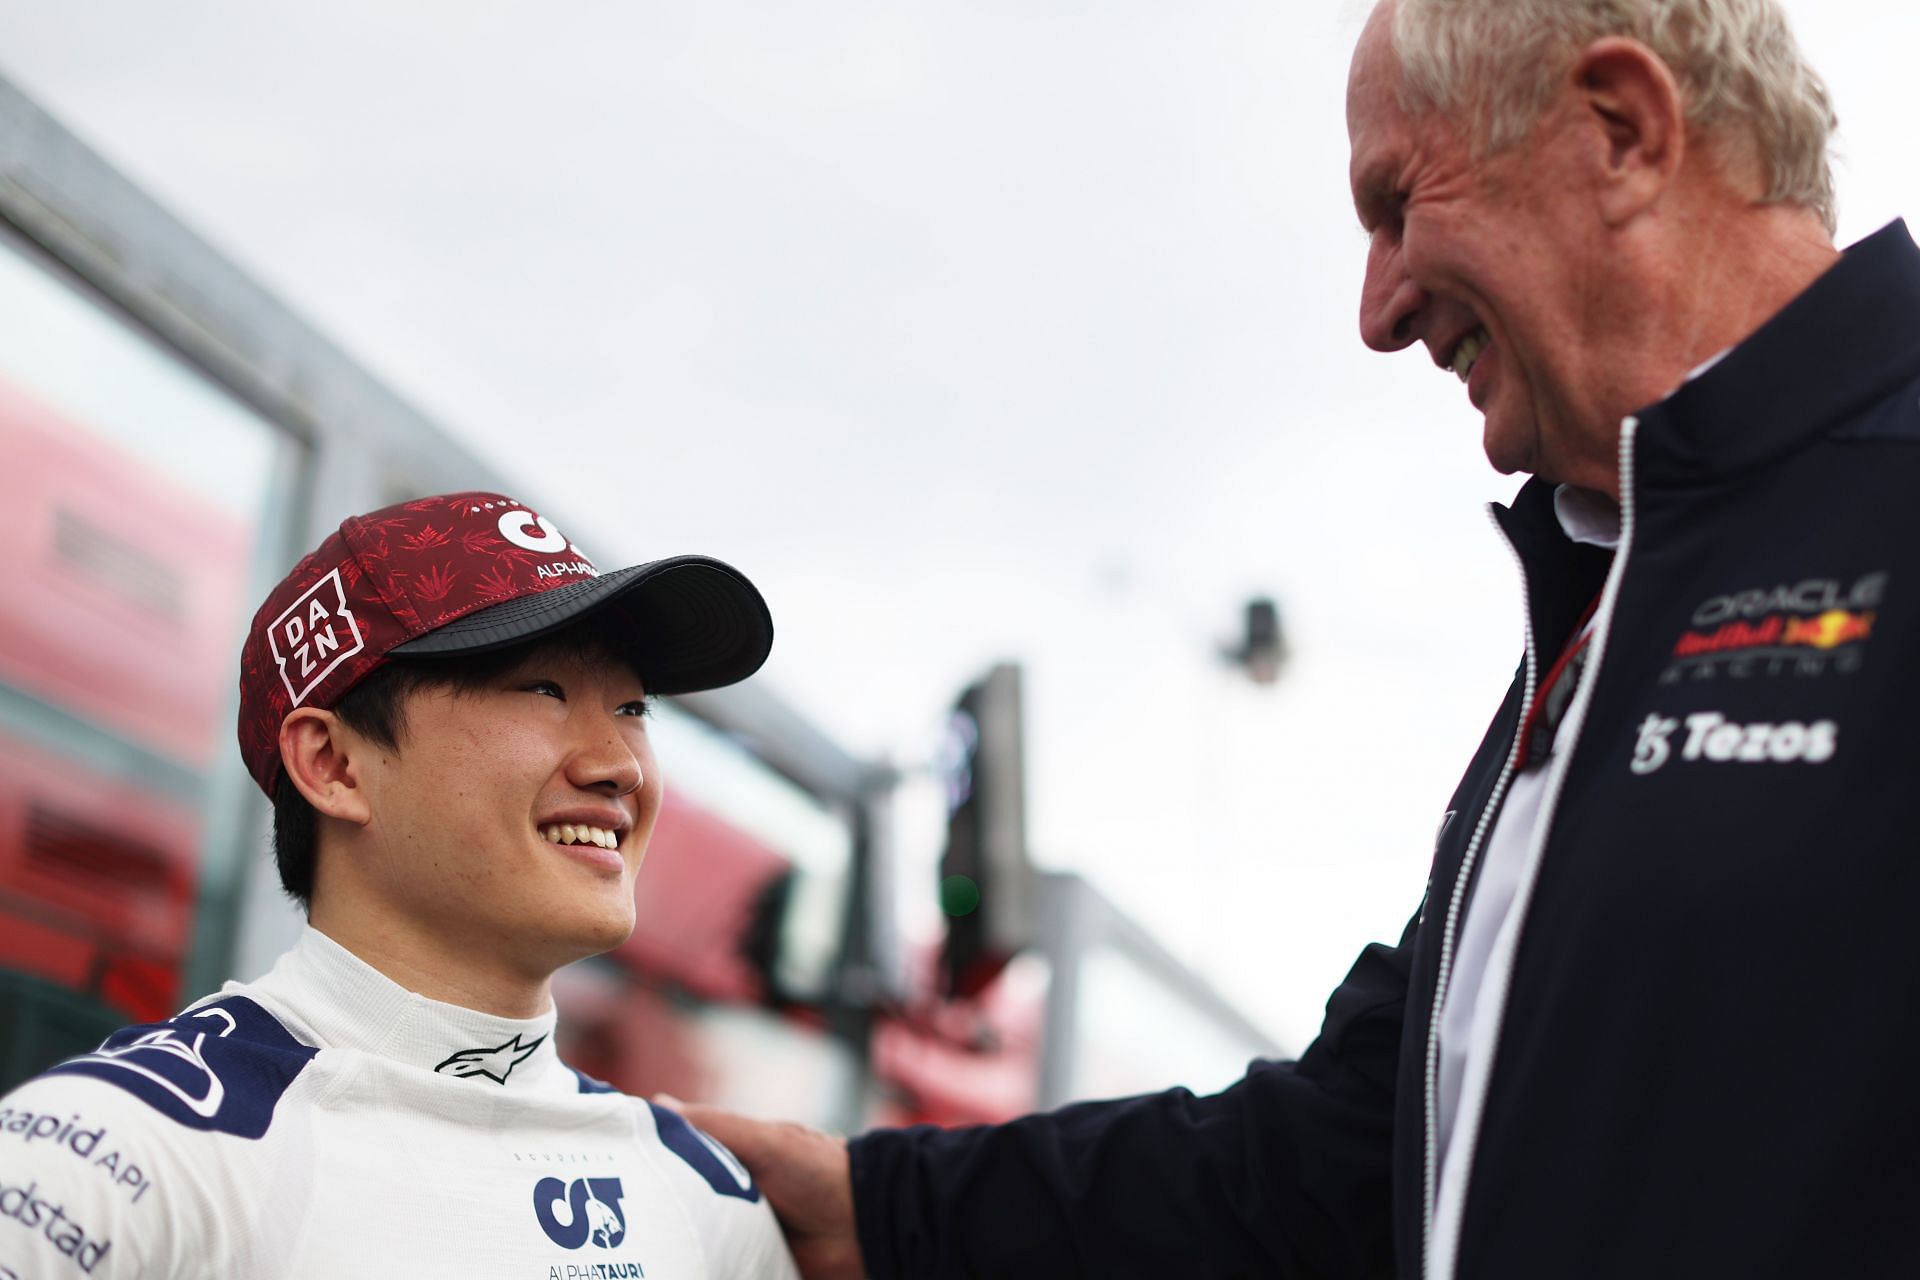 Yuki Tsunoda talks with Red Bull Racing team consultant Dr. Helmut Marko on the grid during Sprint ahead of the F1 Grand Prix of Emilia Romagna at Autodromo Enzo e Dino Ferrari on April 23, 2022, in Imola, Italy (Photo by Peter Fox/Getty Images)